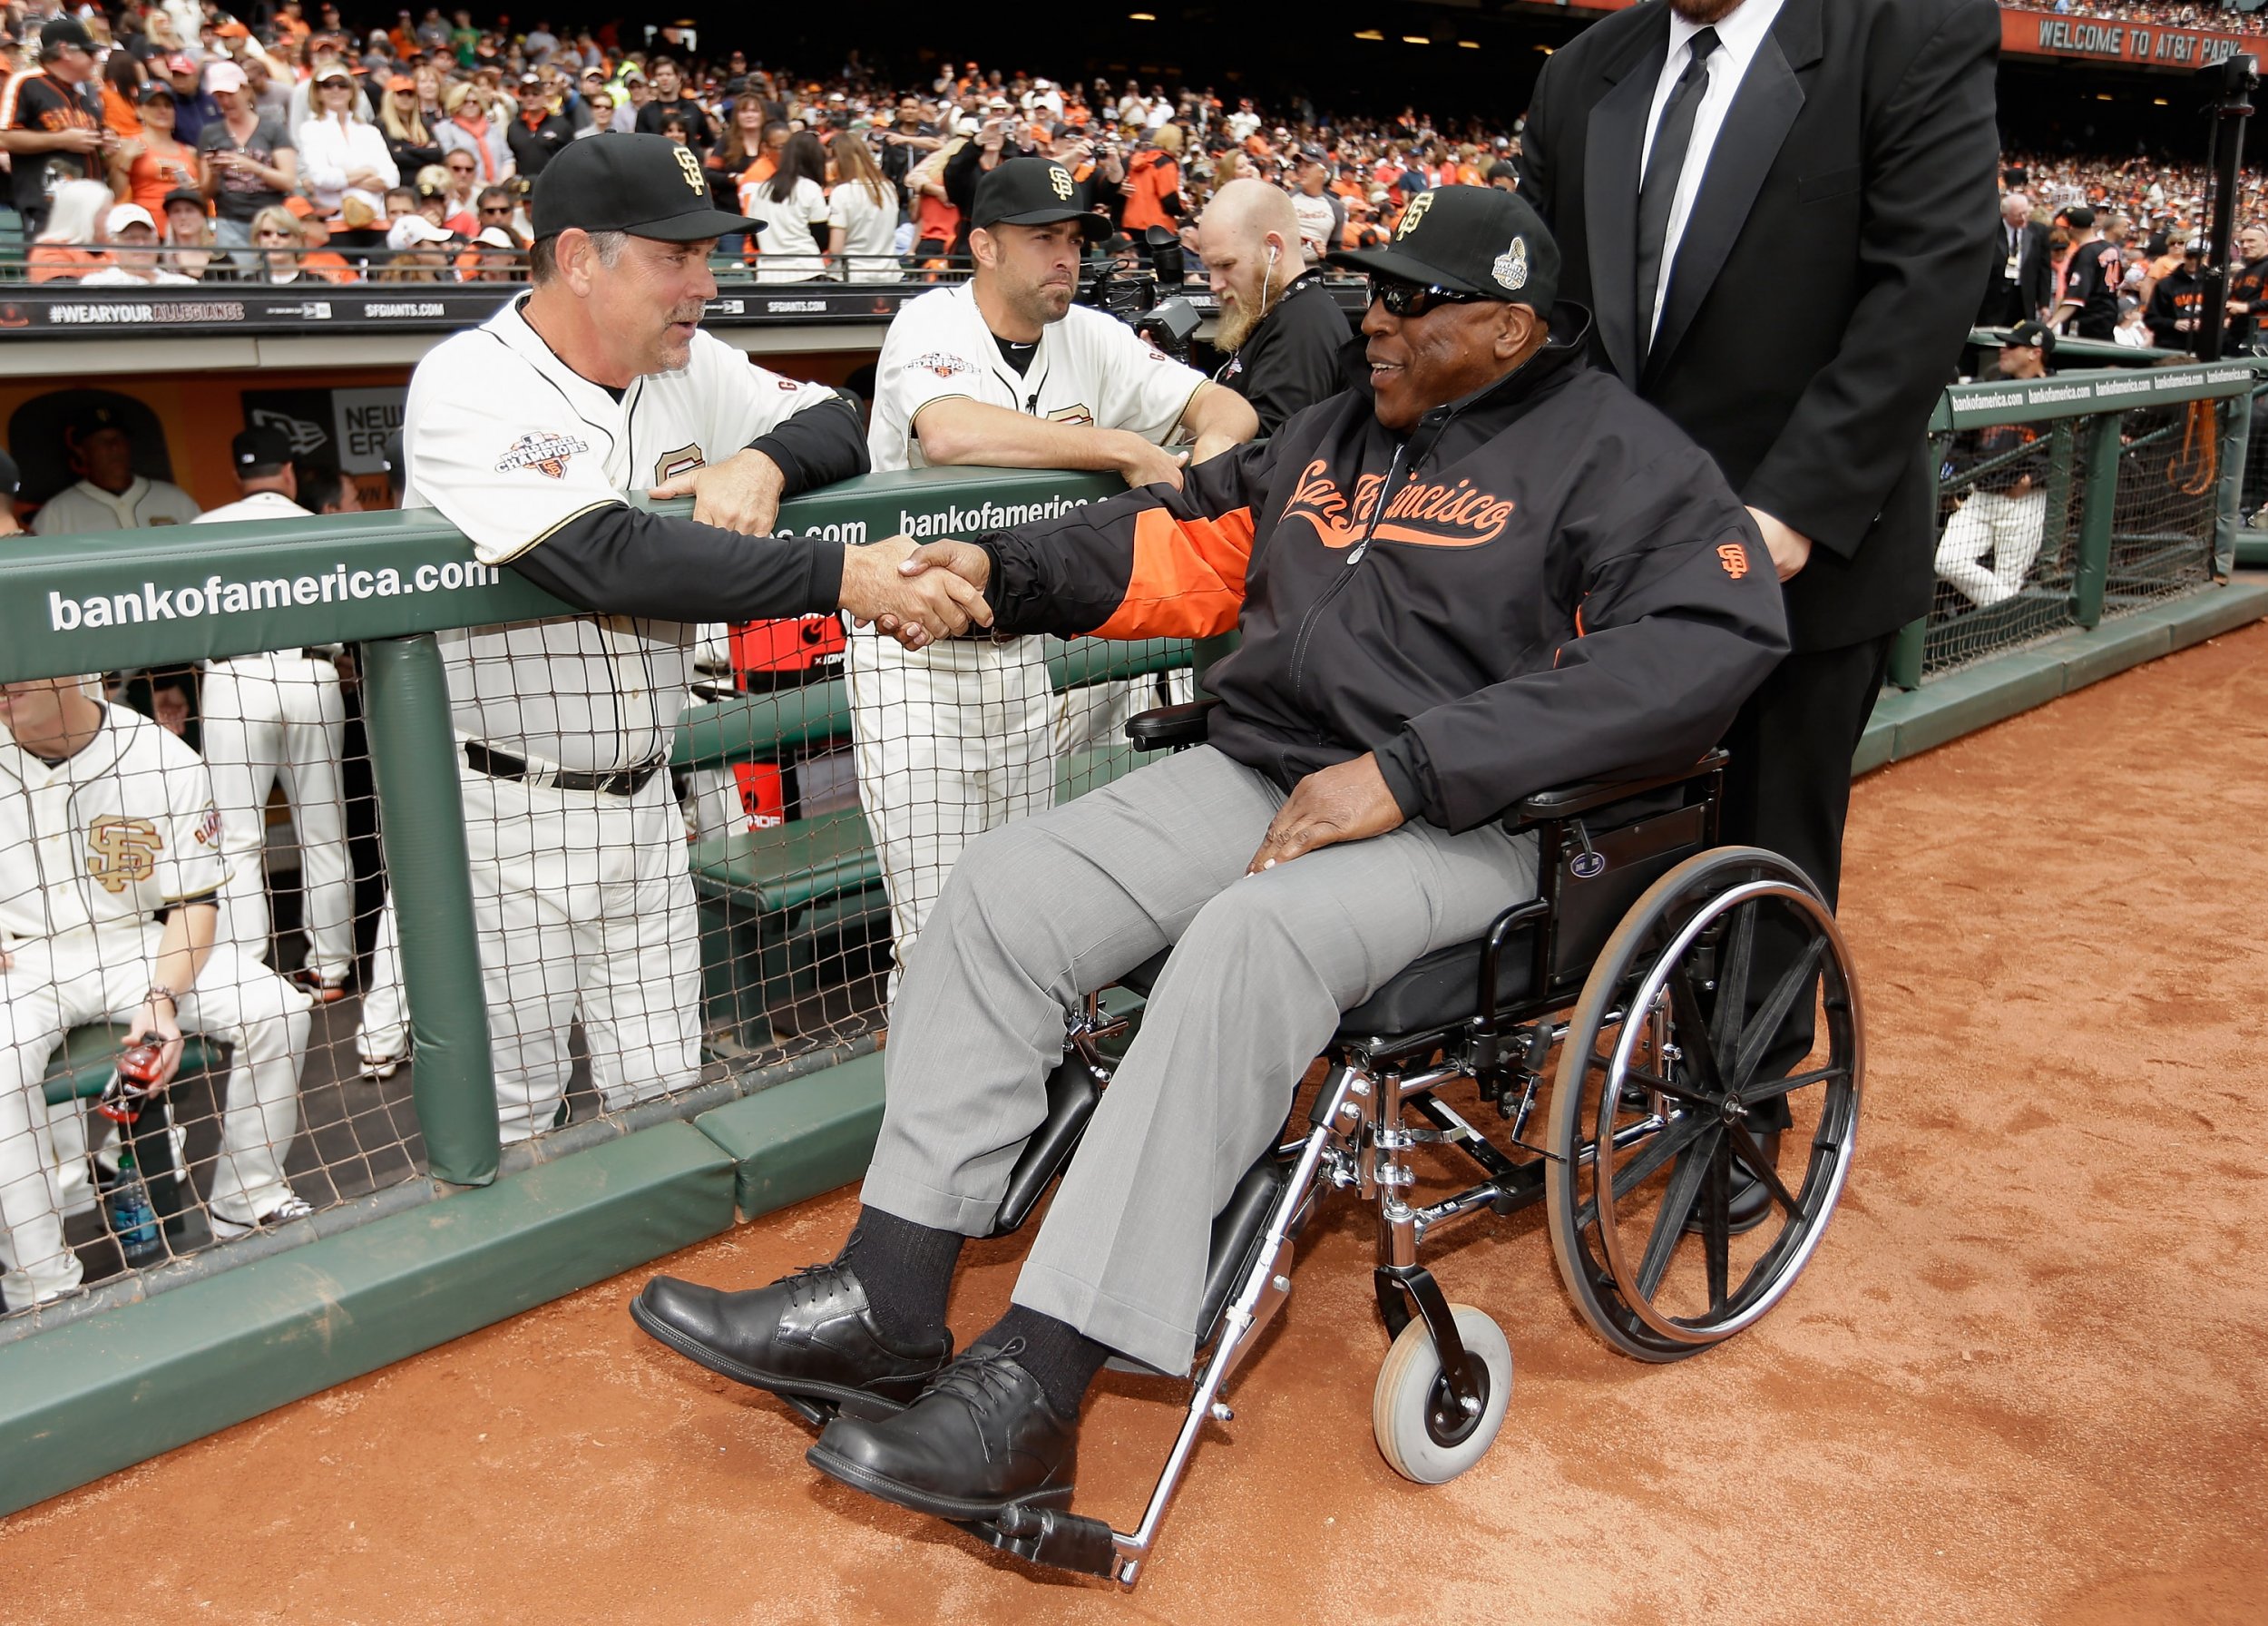 Baseball legend Willie McCovey Dead at 80, San Francisco Giants Confirm